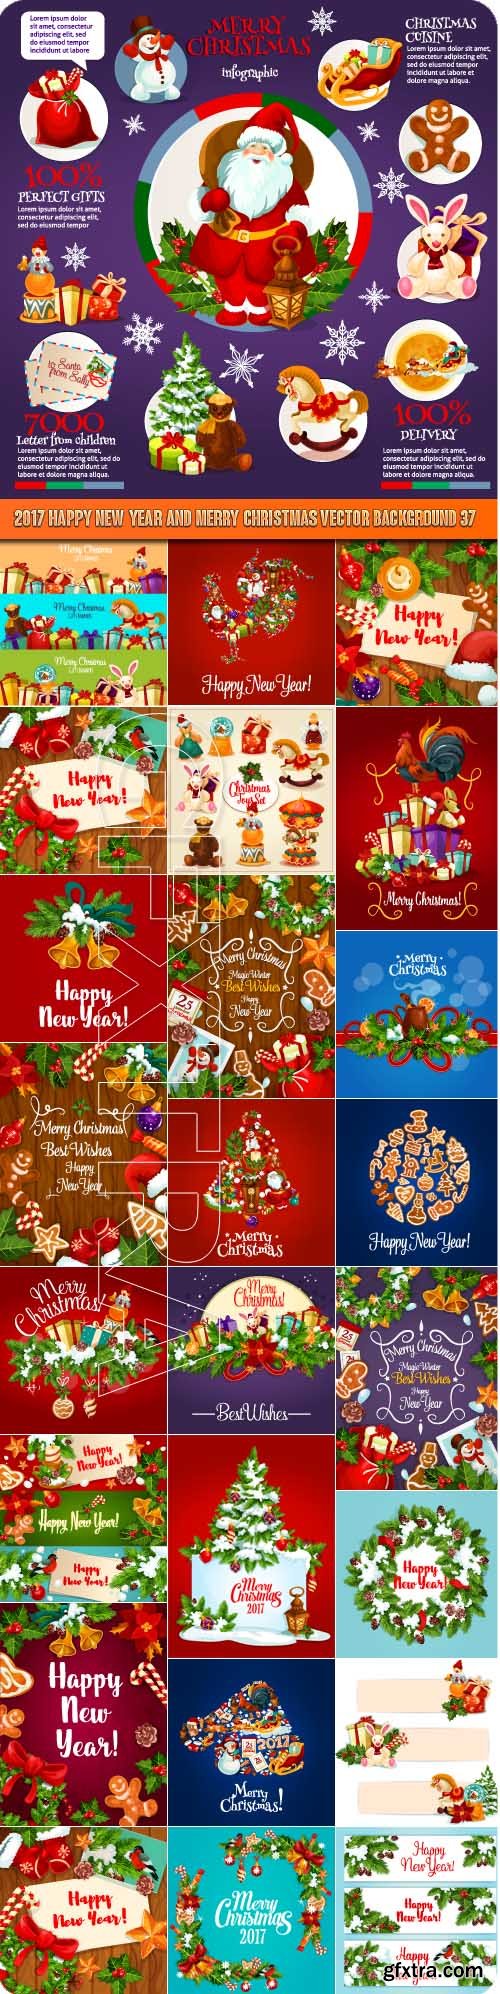 2017 Happy New Year and Merry Christmas vector background 37